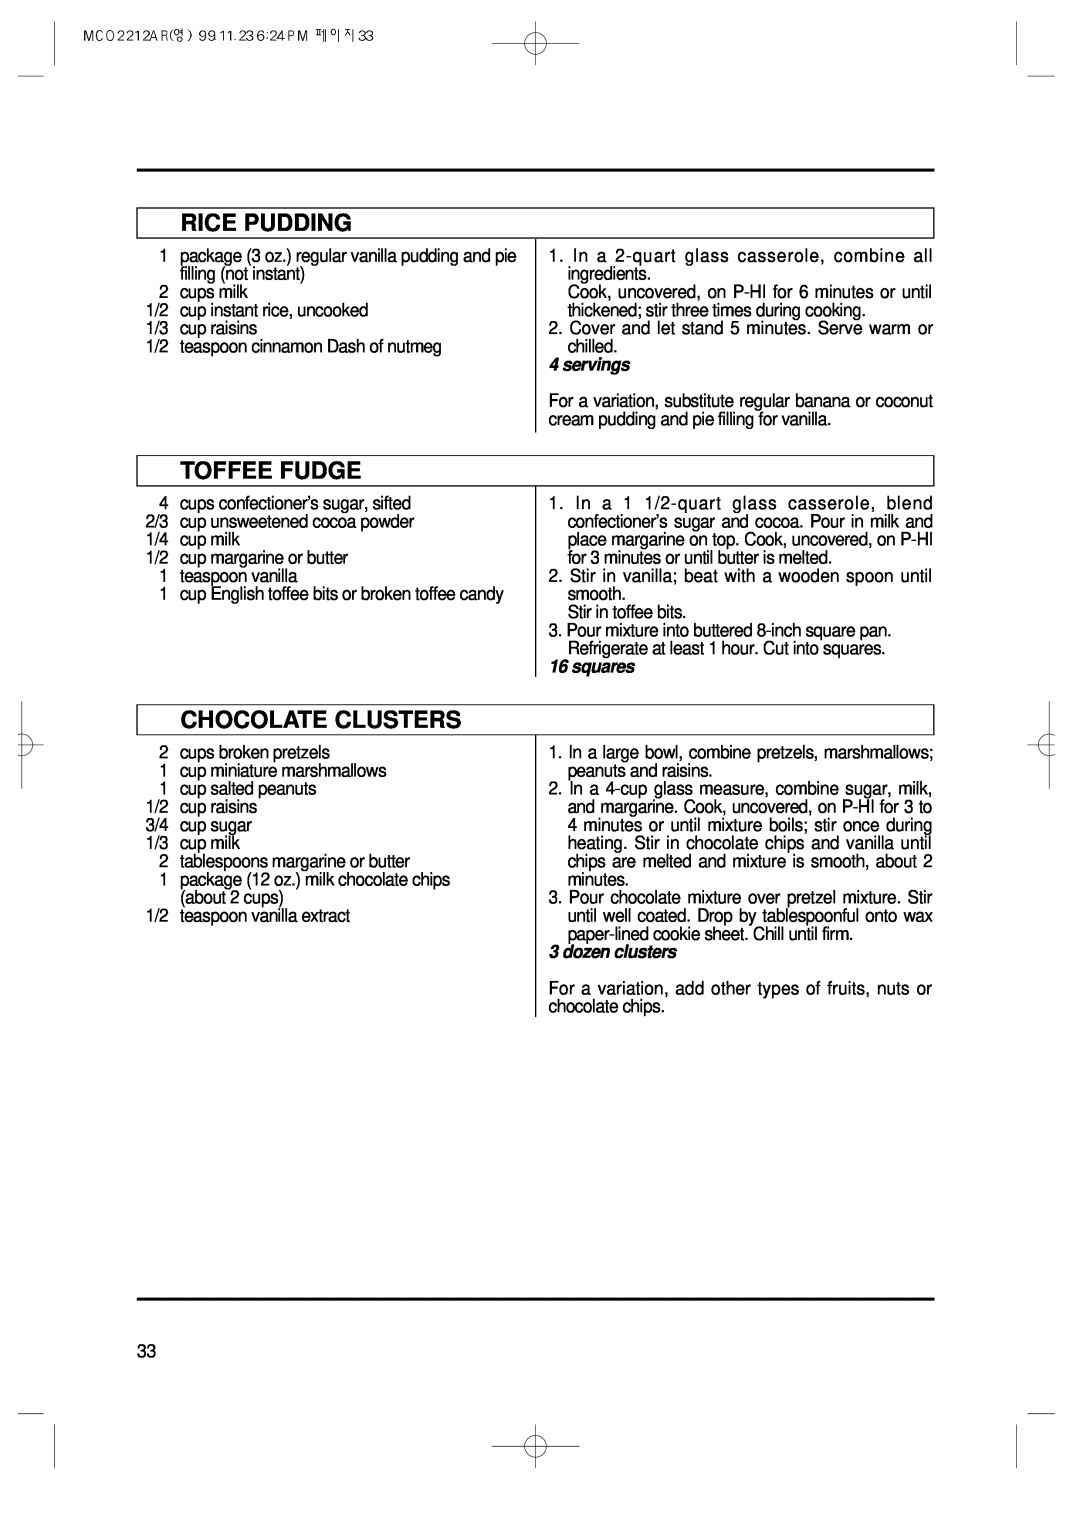 Magic Chef MCO2212AR manual Rice Pudding, Toffee Fudge, Chocolate Clusters, squares, dozen clusters, servings 